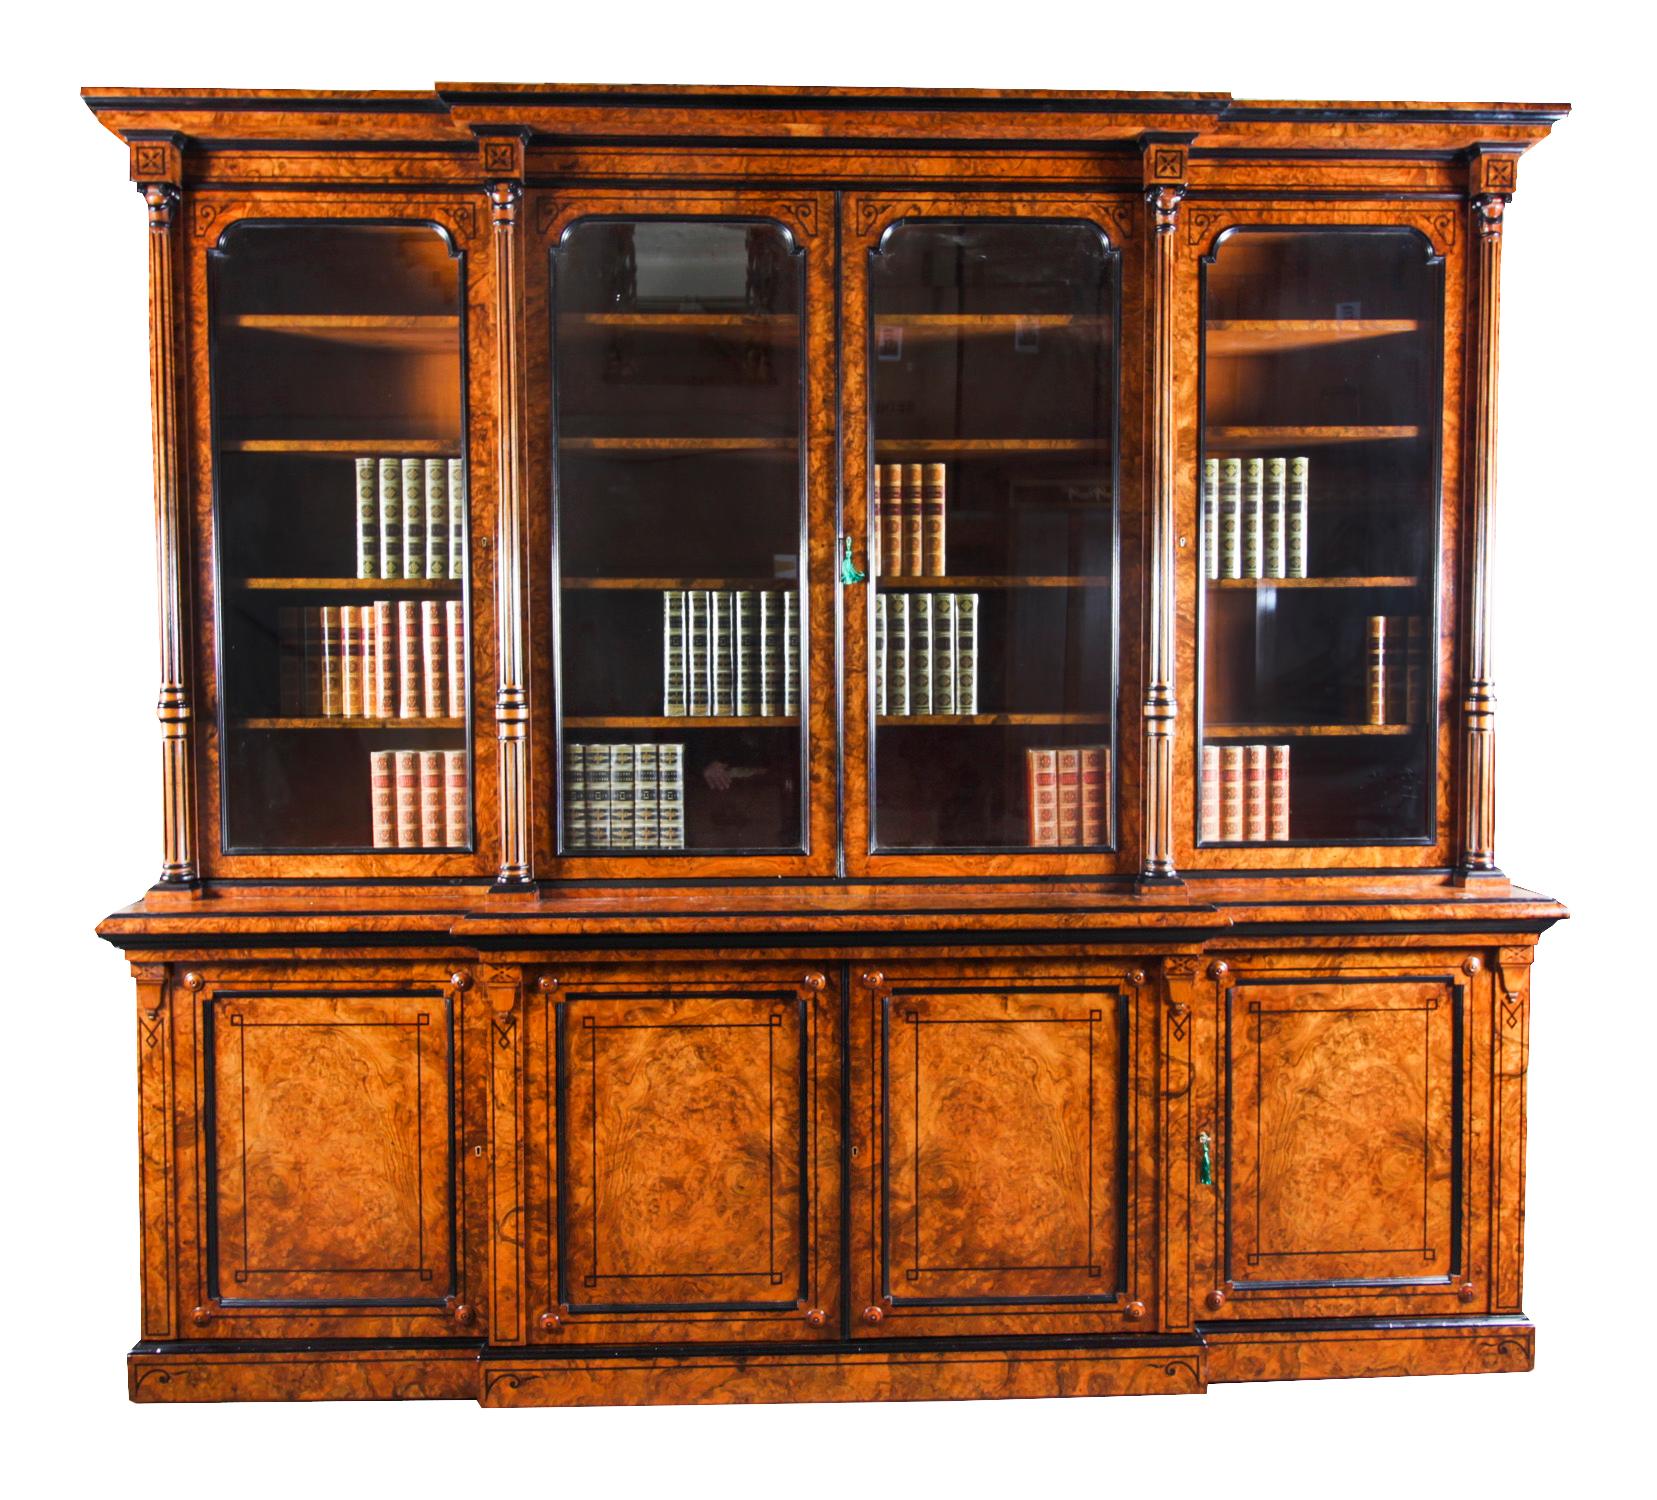 A superb antique English Victorian top quality burr walnut and ebonised four door breakfront library bookcase, attributed to Lamb of Manchester,  Circa 1850 in date.

This magnificent bookcase is made from the highest quality burr walnut with